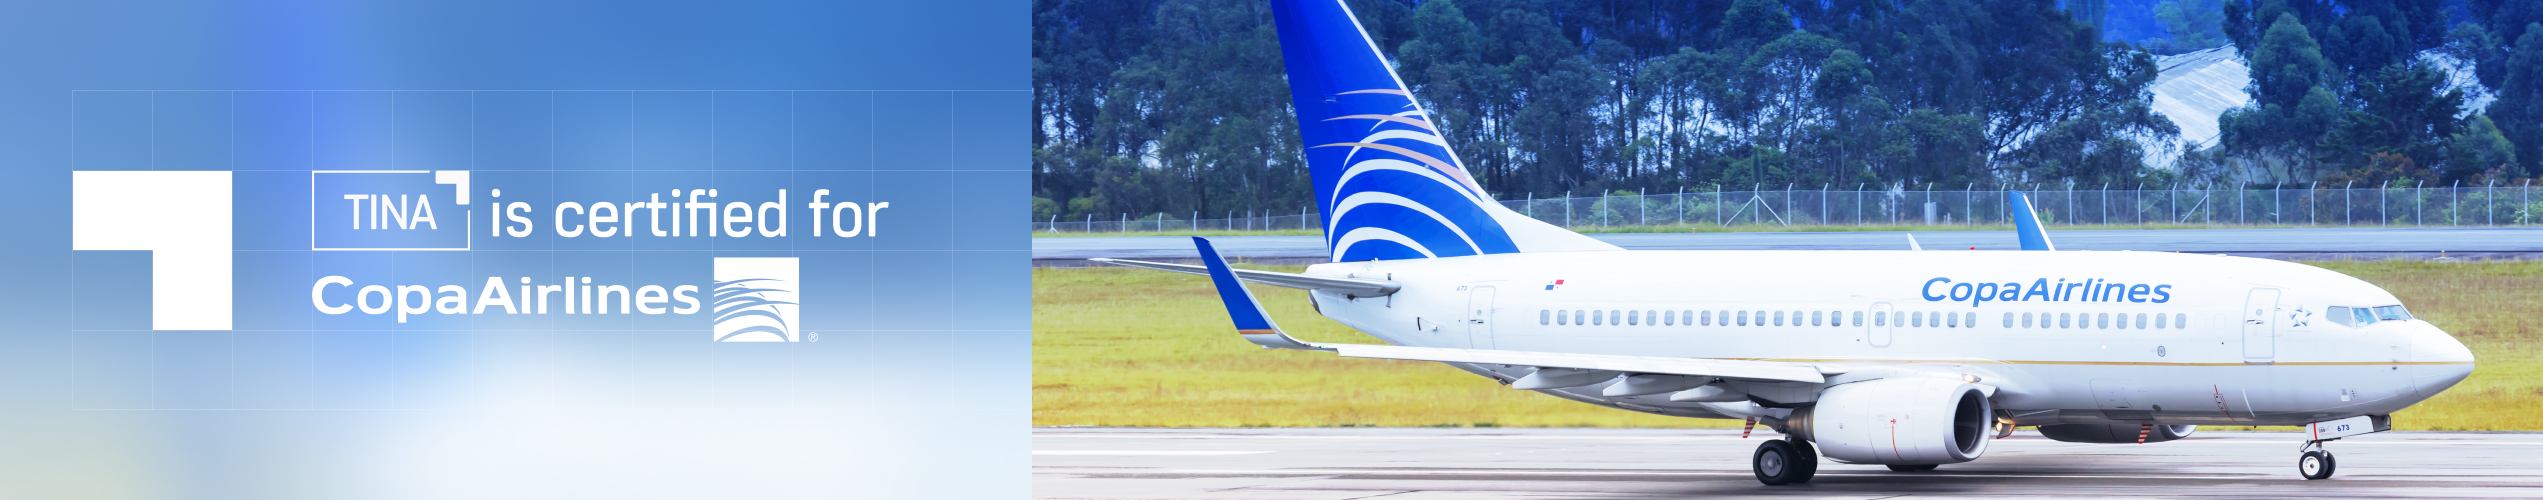 TINA certified for Copa Airlines